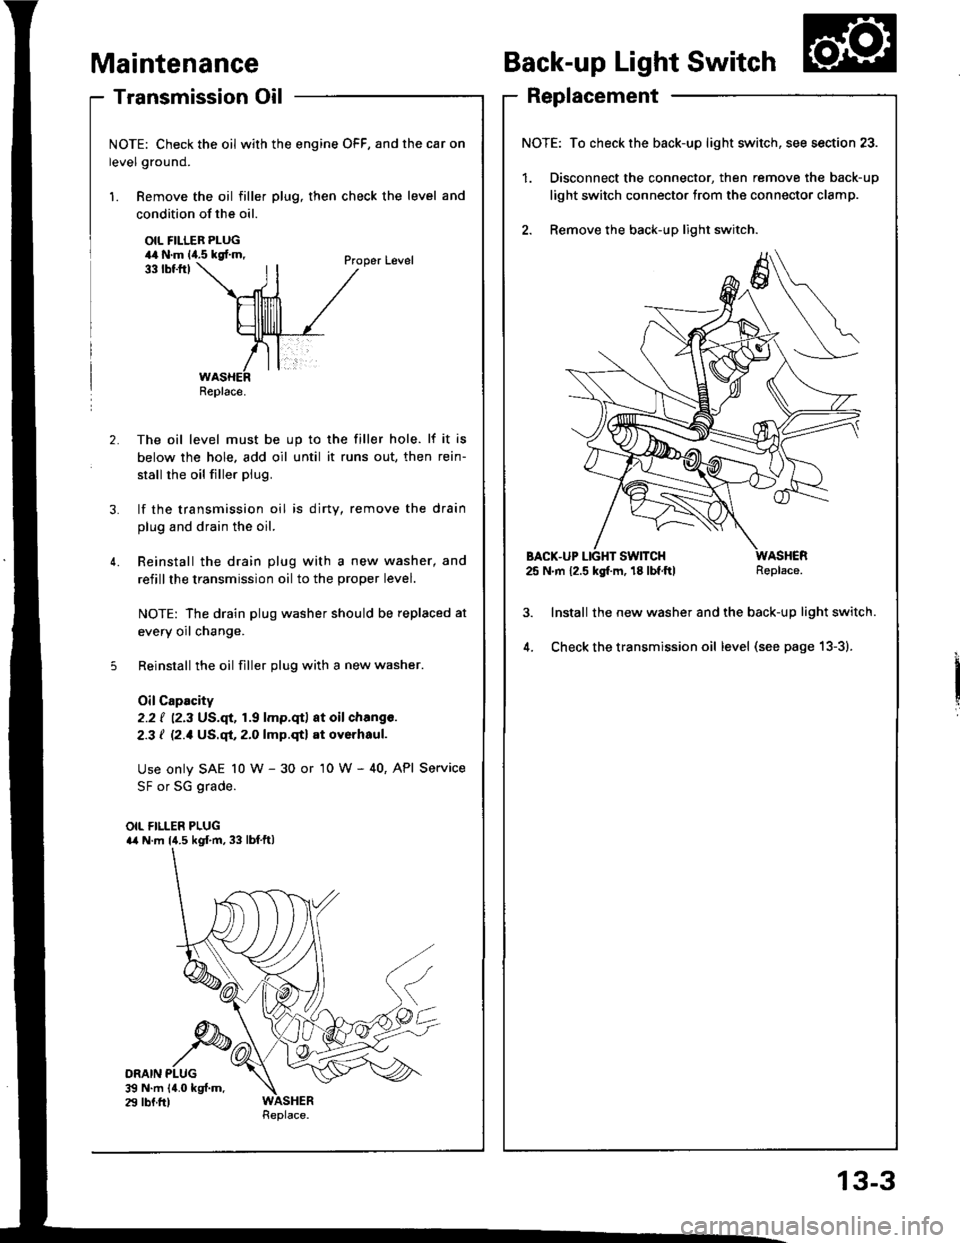 HONDA INTEGRA 1994 4.G Workshop Manual - Transmission Oil
NOTE: Check the oil with the engine OFF, and the car on
level ground.
1. Remove the oil filler plug, then check the level and
Maintenance
condition of the oil.
OIL FILLER PLUG44 N.m